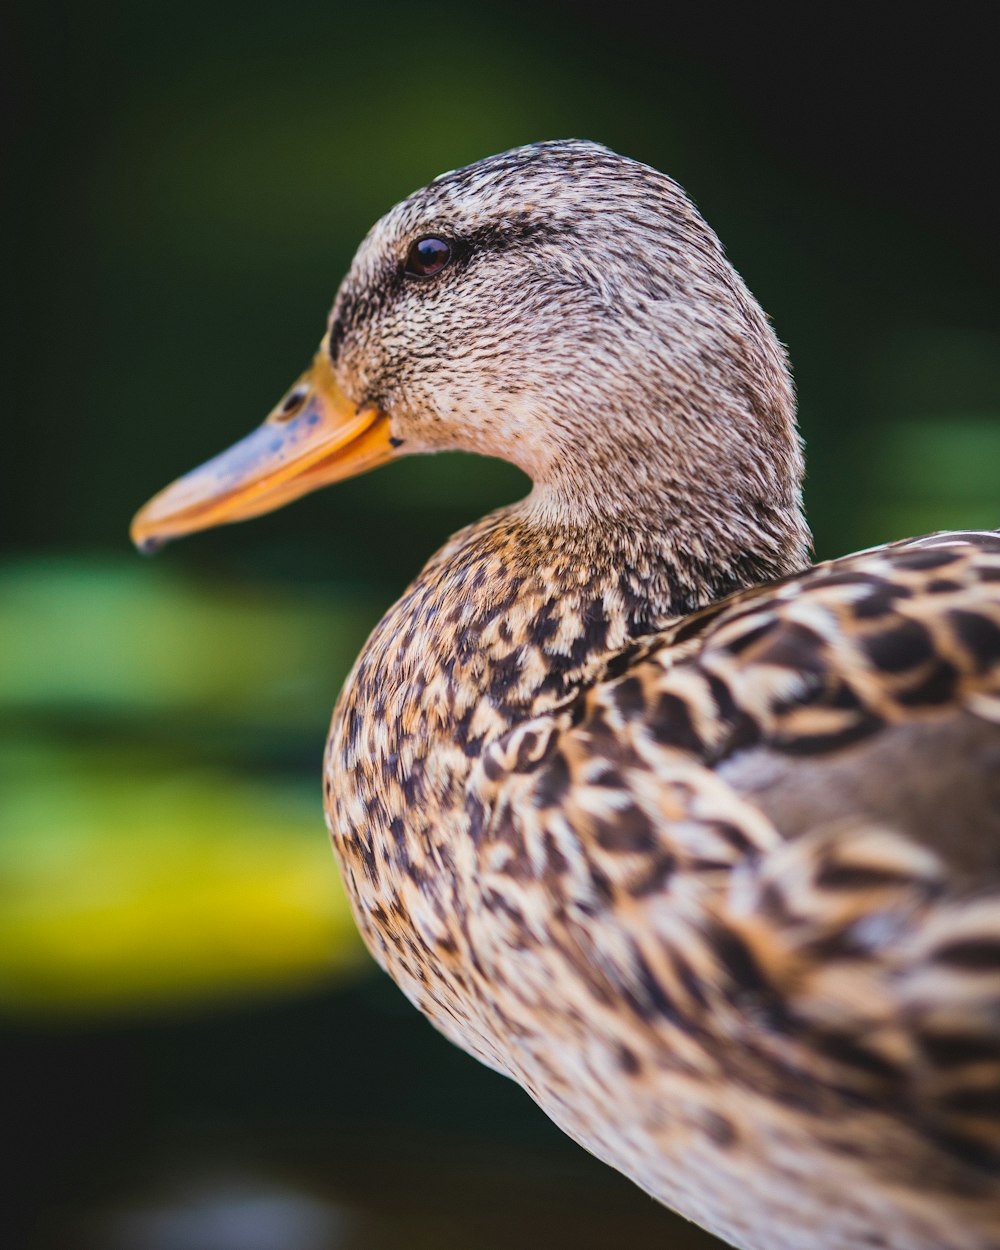 brown duck in close up photography